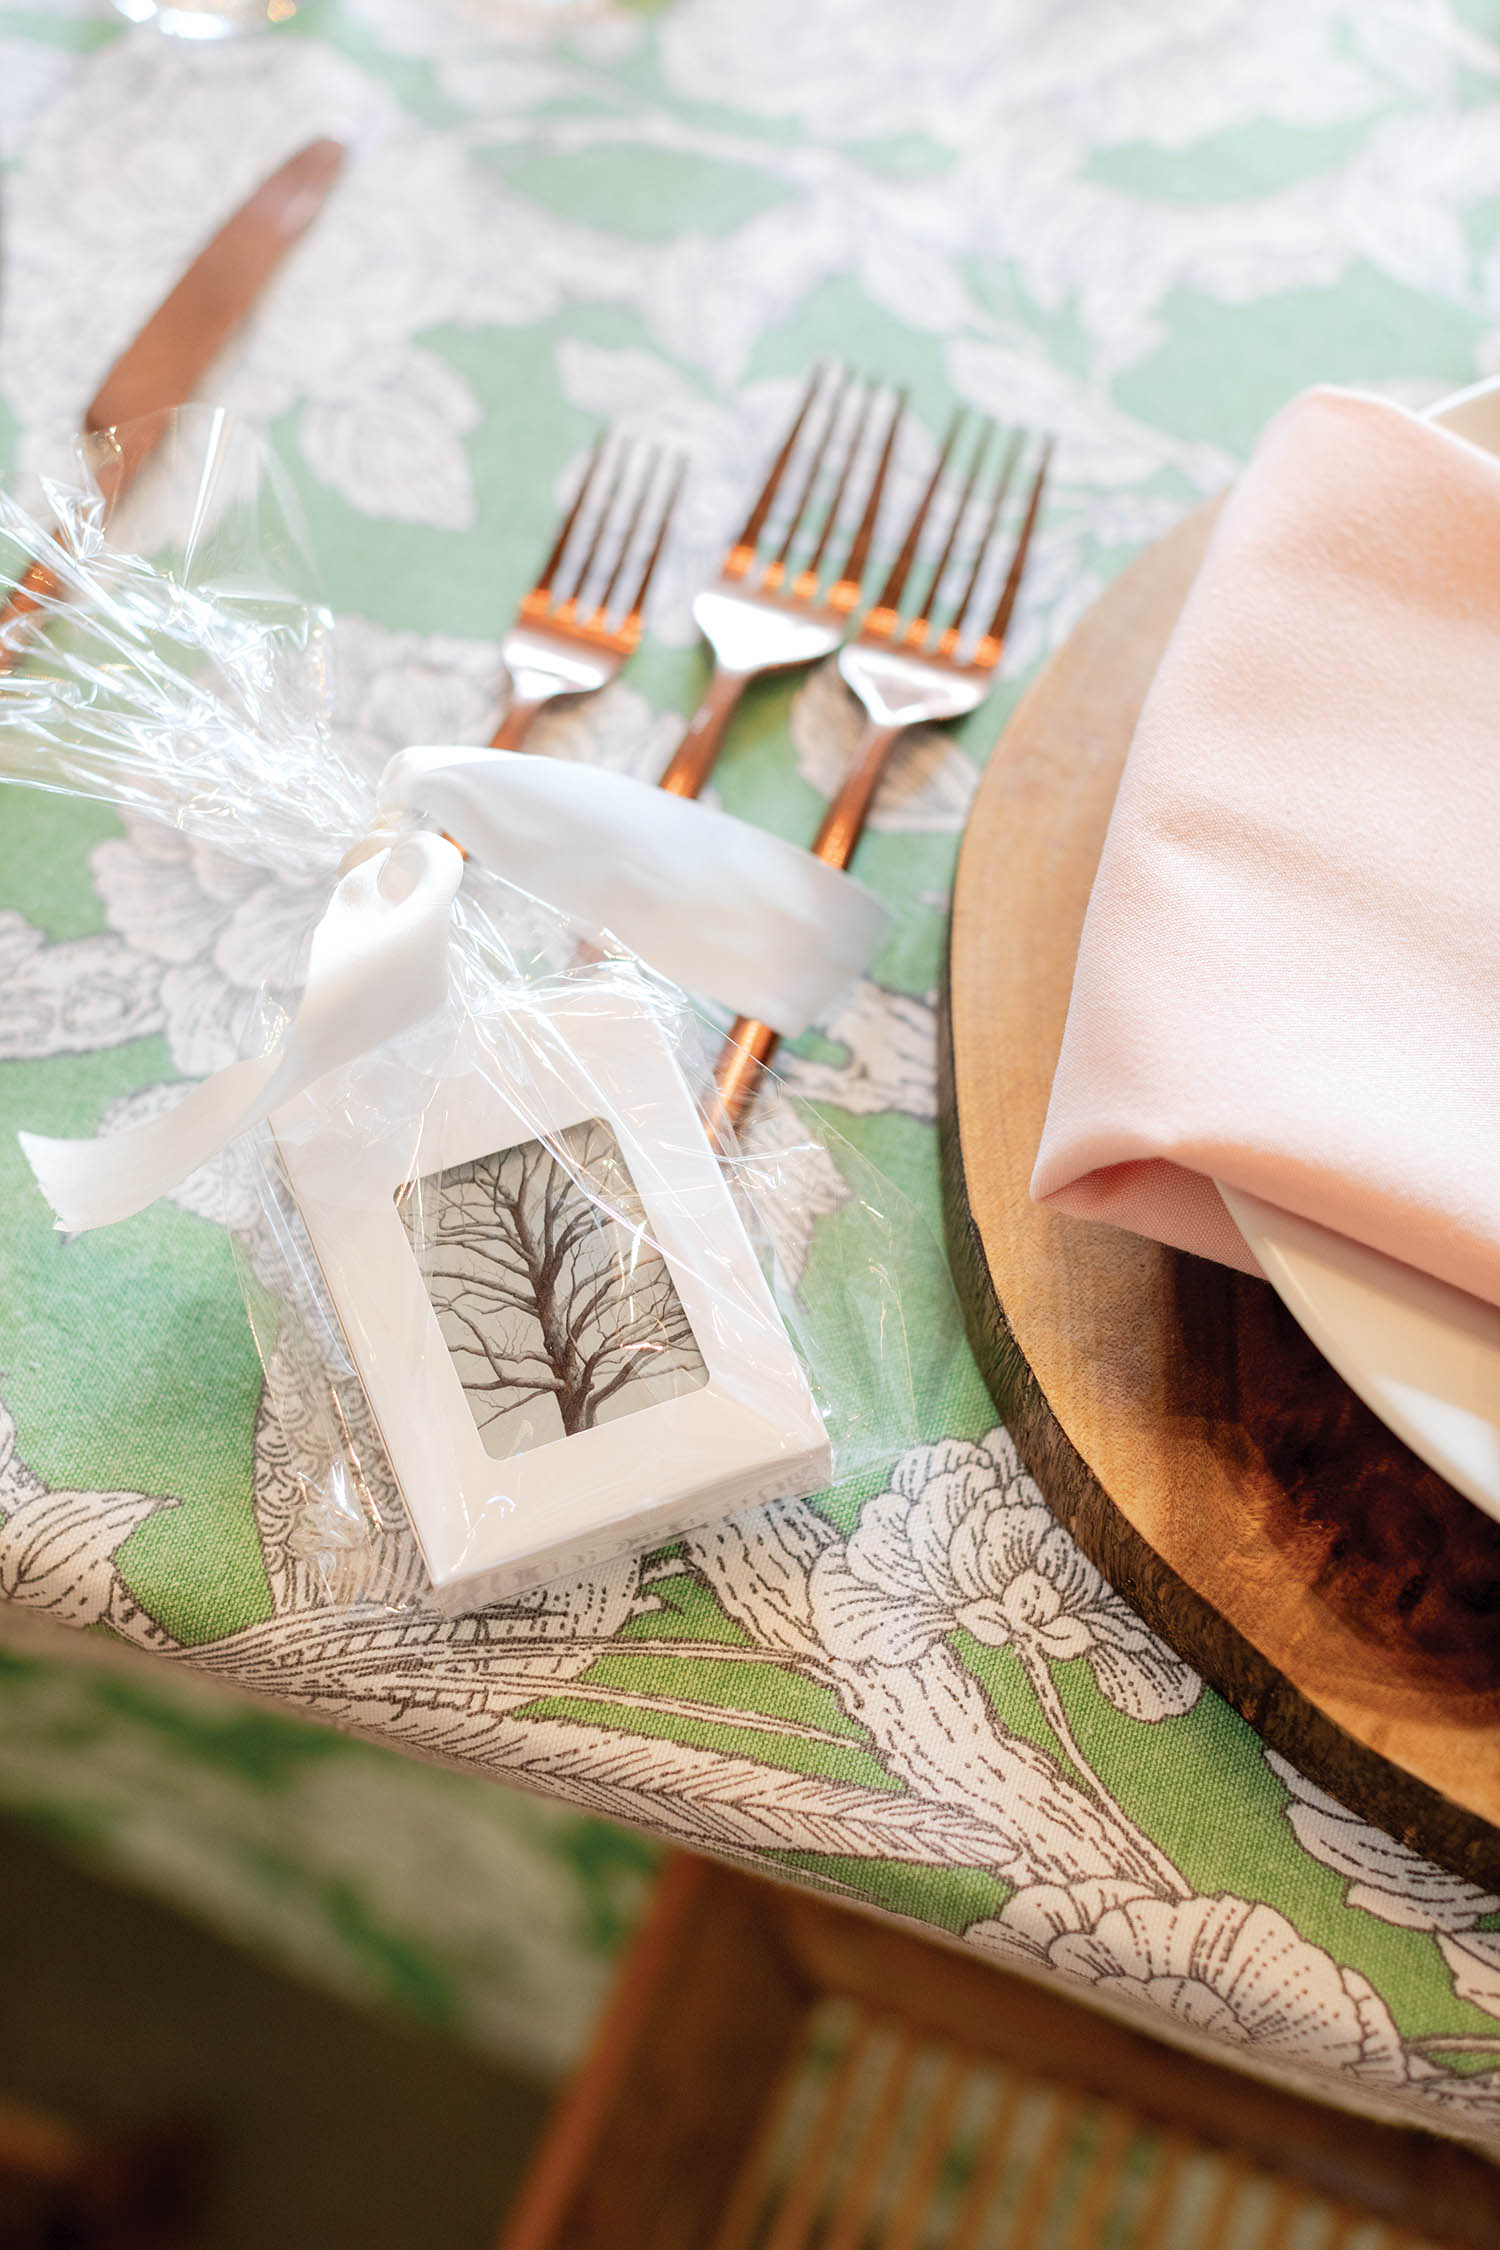 Silverware is tied with a ribbon and a deck of playing cards while sitting on top of a green floral table cloth.